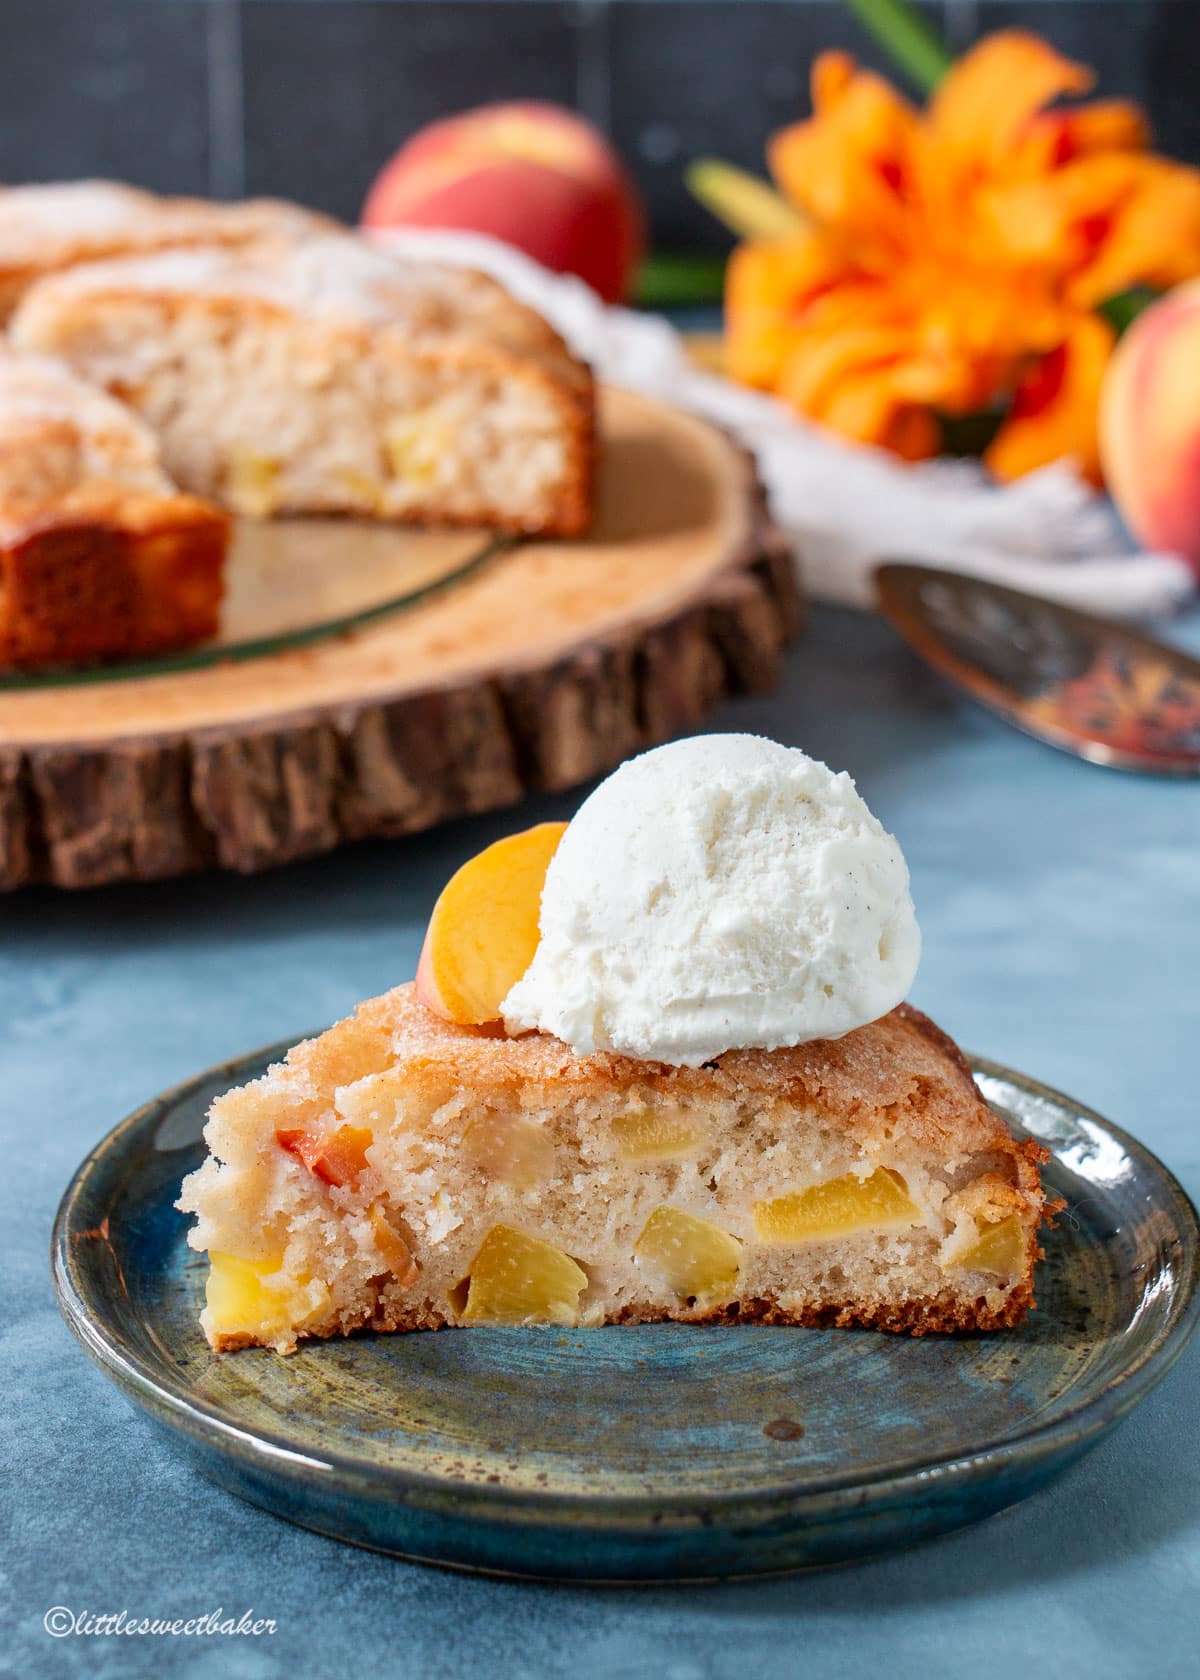 A slice of peach cake topped with ice cream and a peach slice